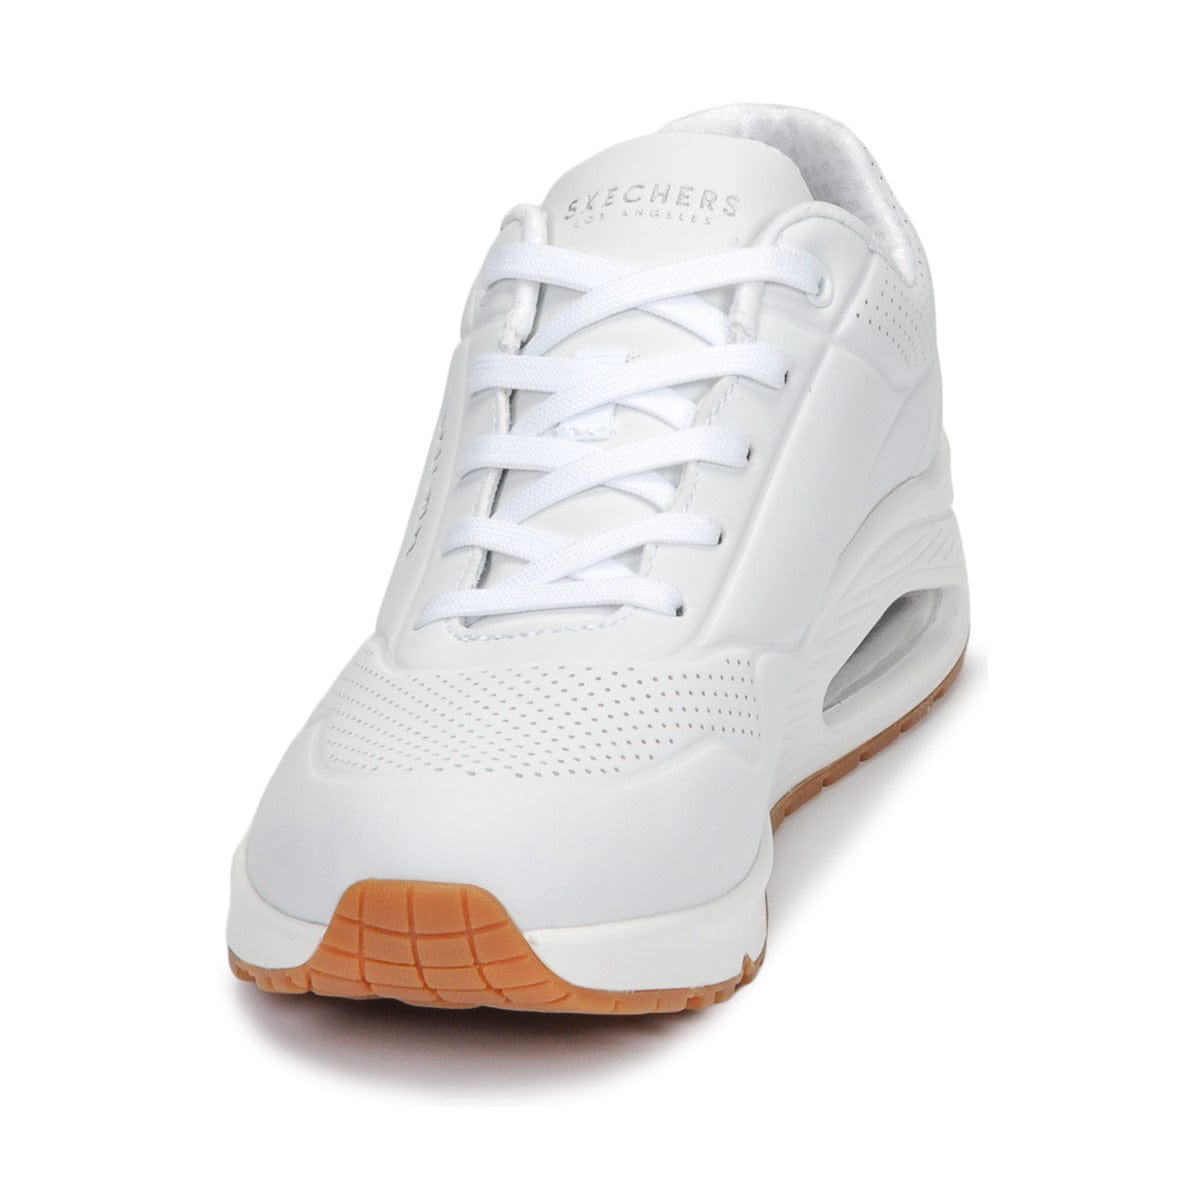 Skechers Uno Stand On Air White for Sale ️ Lowest Price Guaranteed